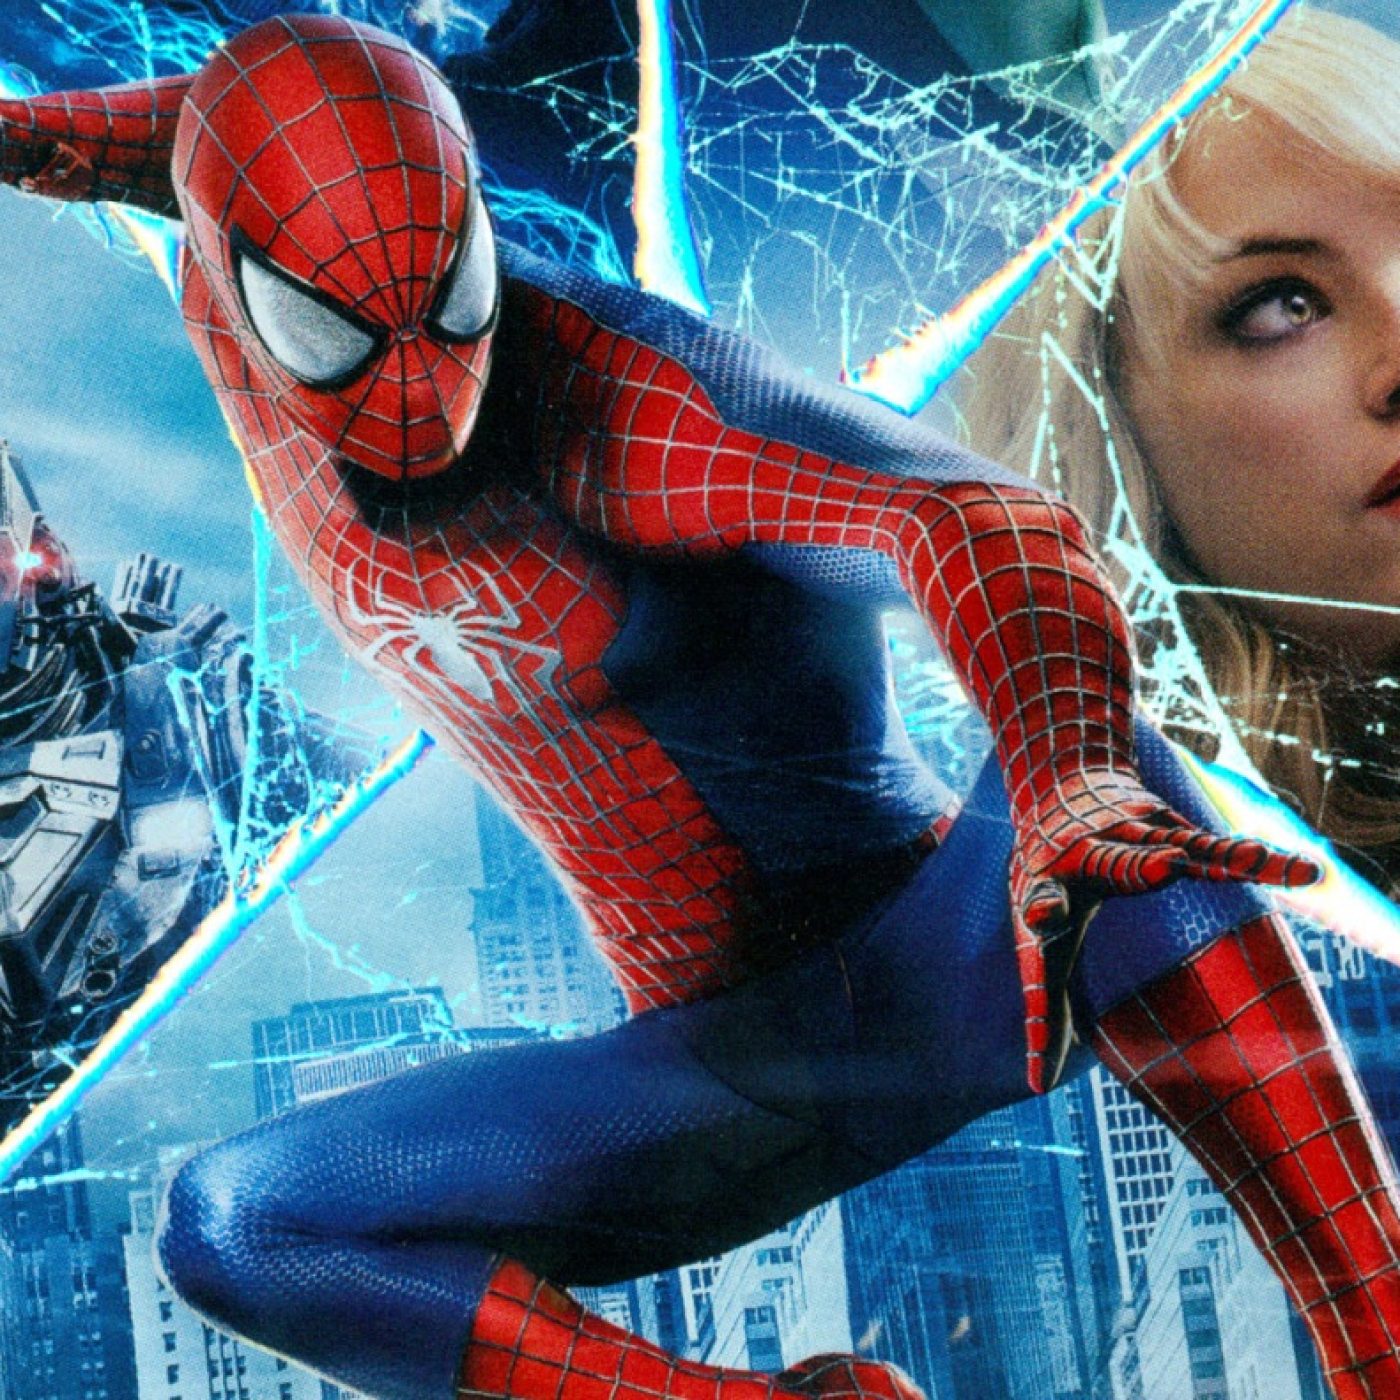 Will We See 'The Amazing Spider-Man 3'?